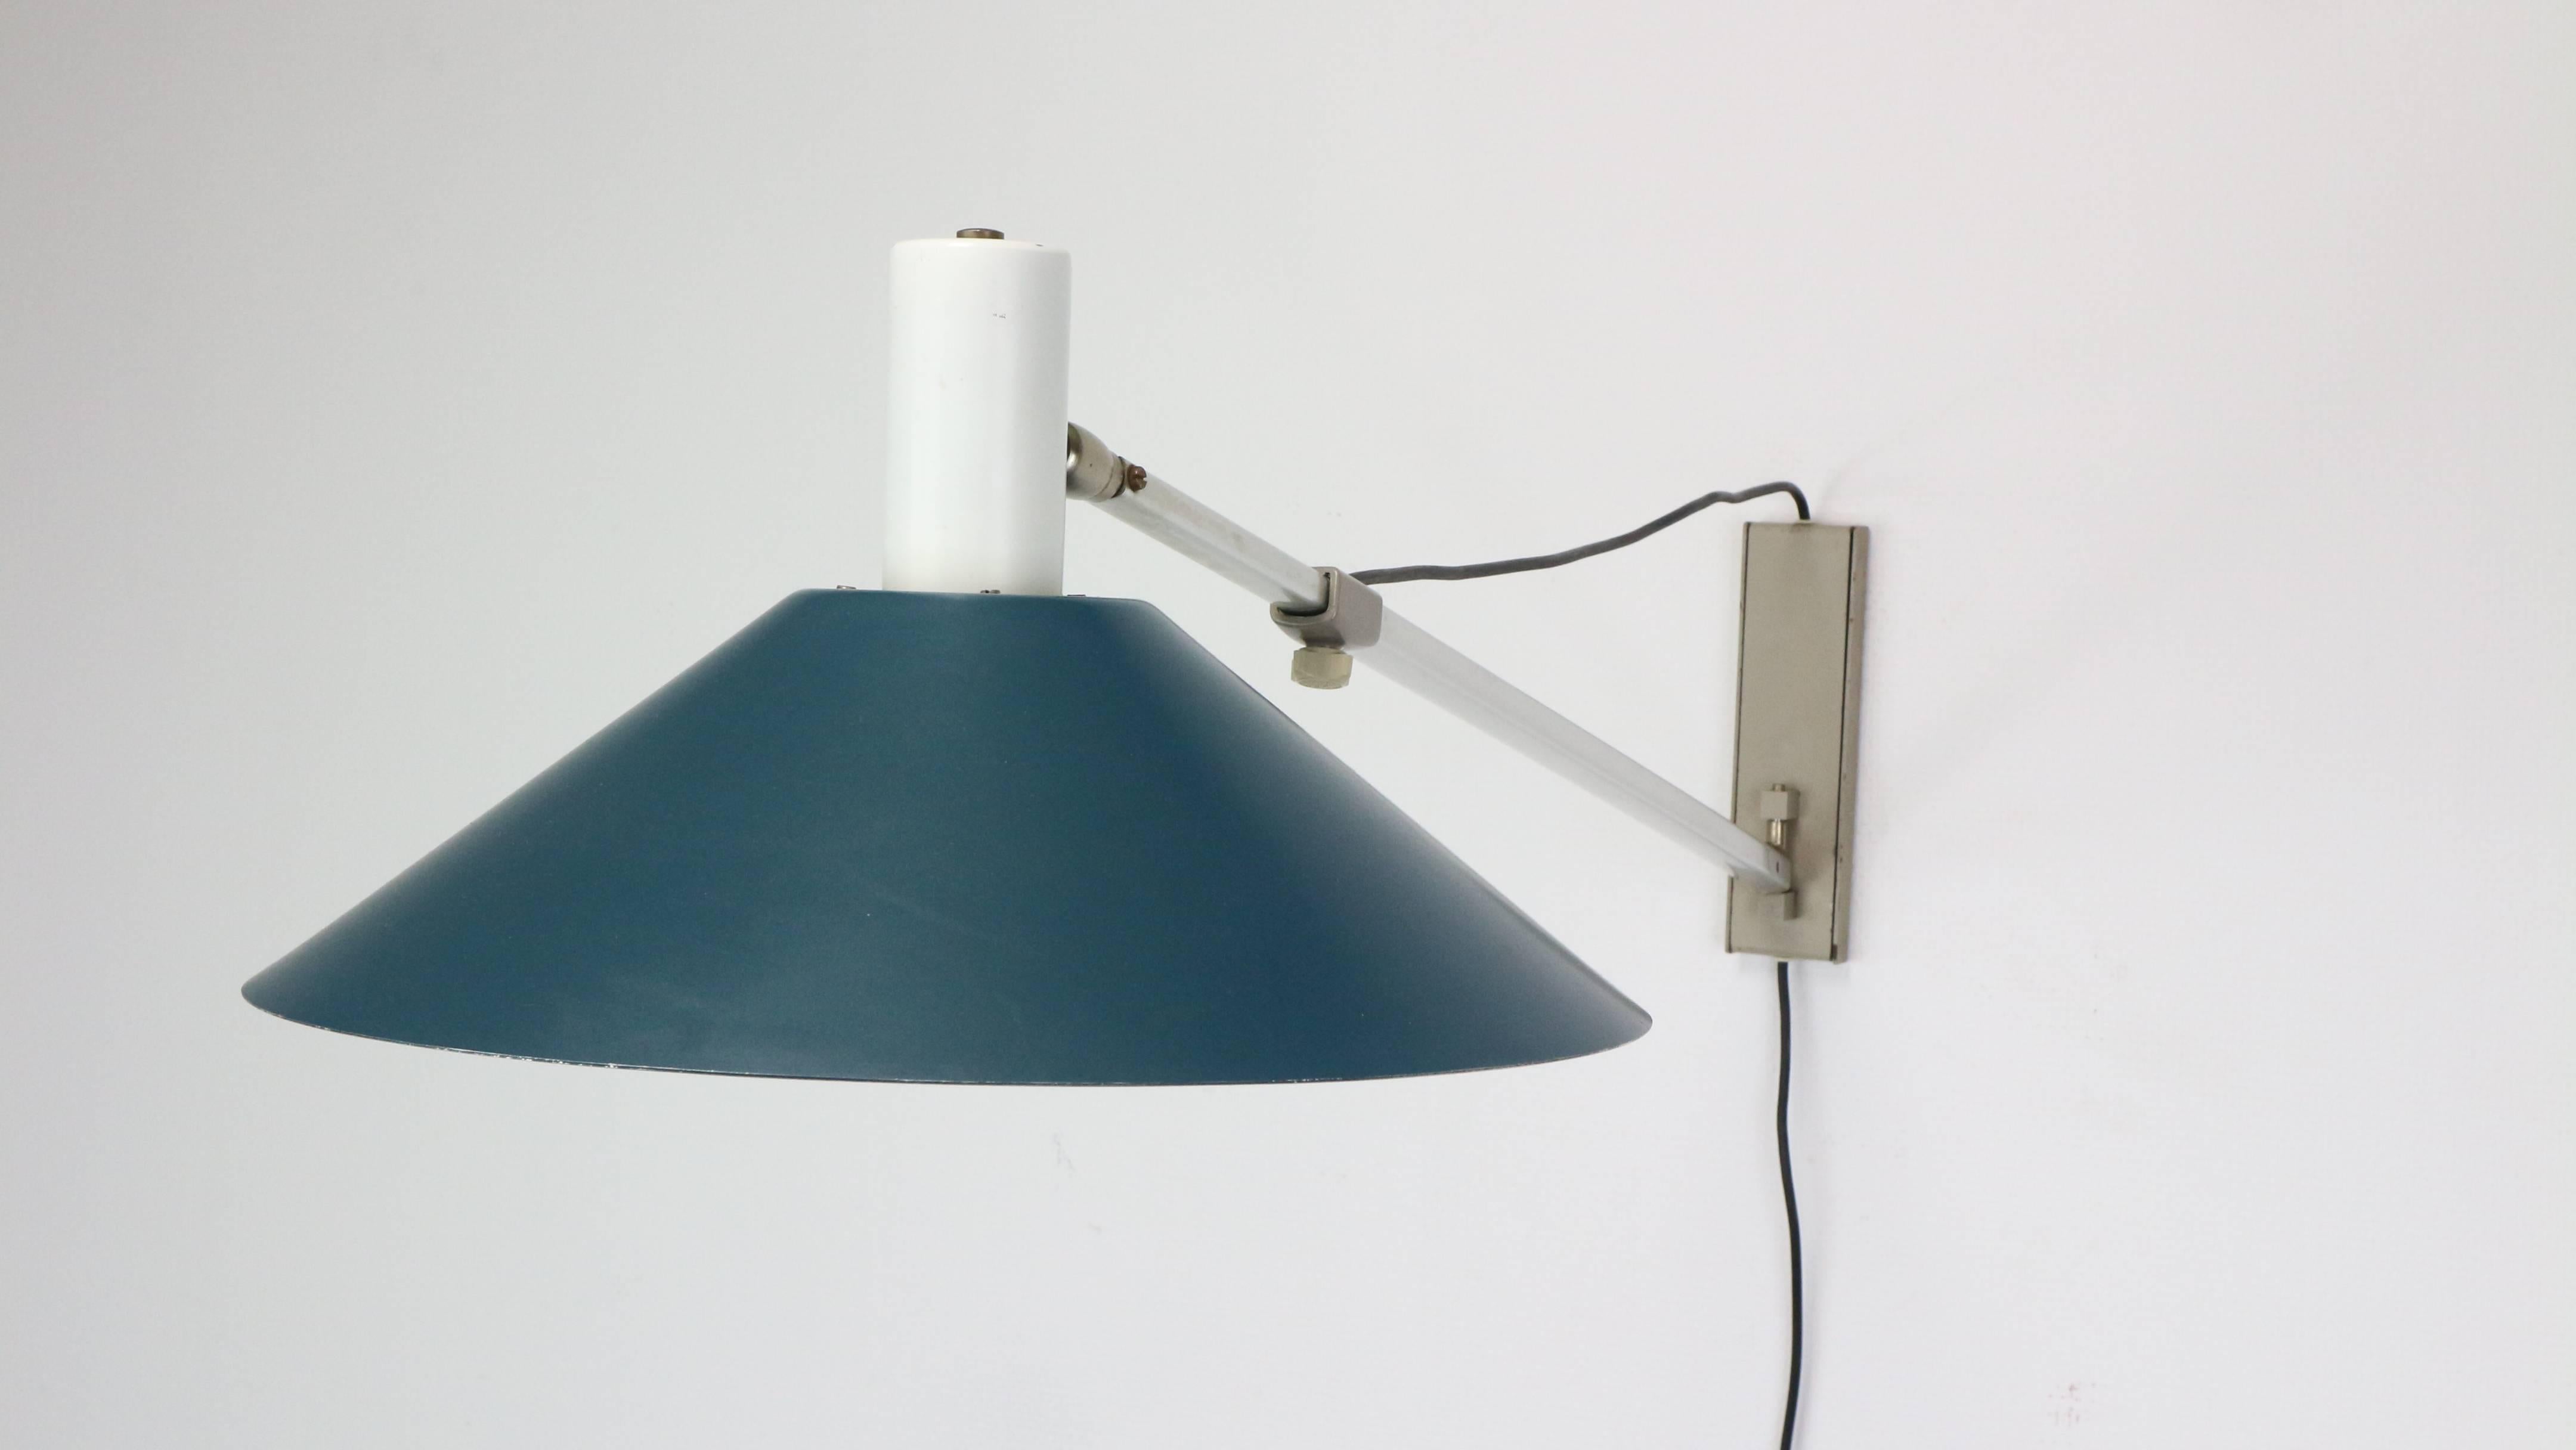 Fantastic adjustable wall lamp model 7093 designed by J.J.M Hoogervorst for Anvia Almelo, Holland, 1957. This lamp has an aluminium anodized arm and blue lacquered shades and grey wall plates. The lamp is adjustable in length hand can rotate in many